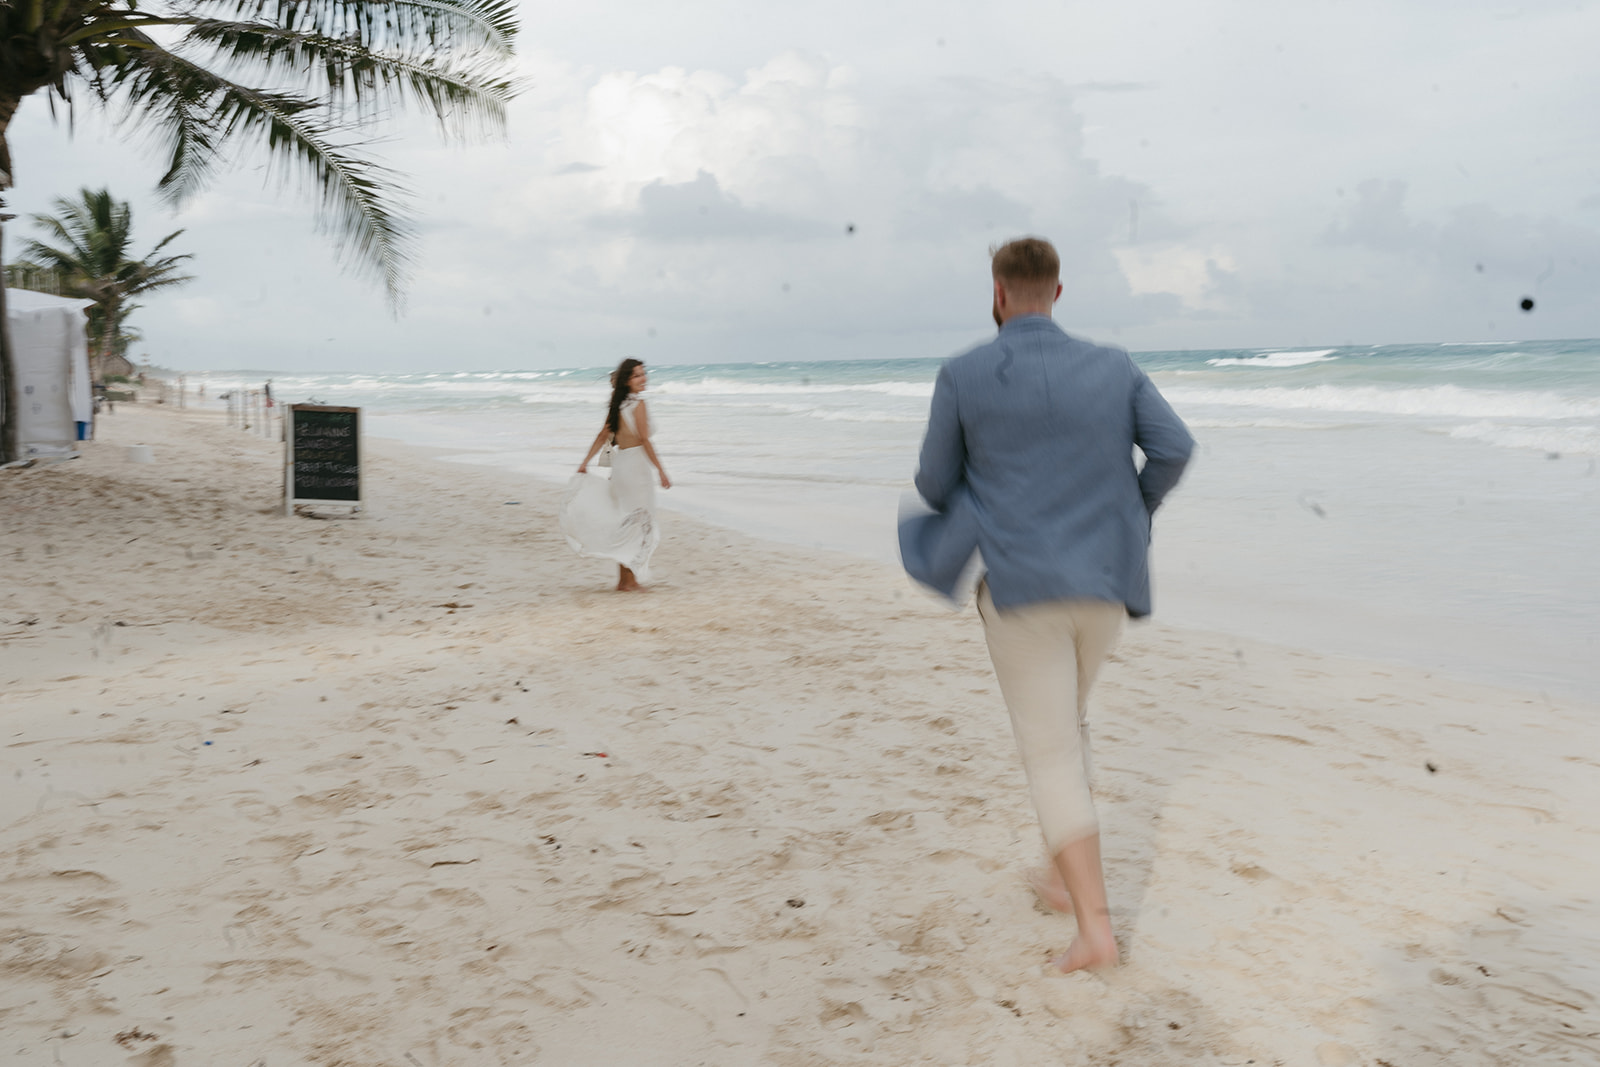 Bride and groom running on the beach